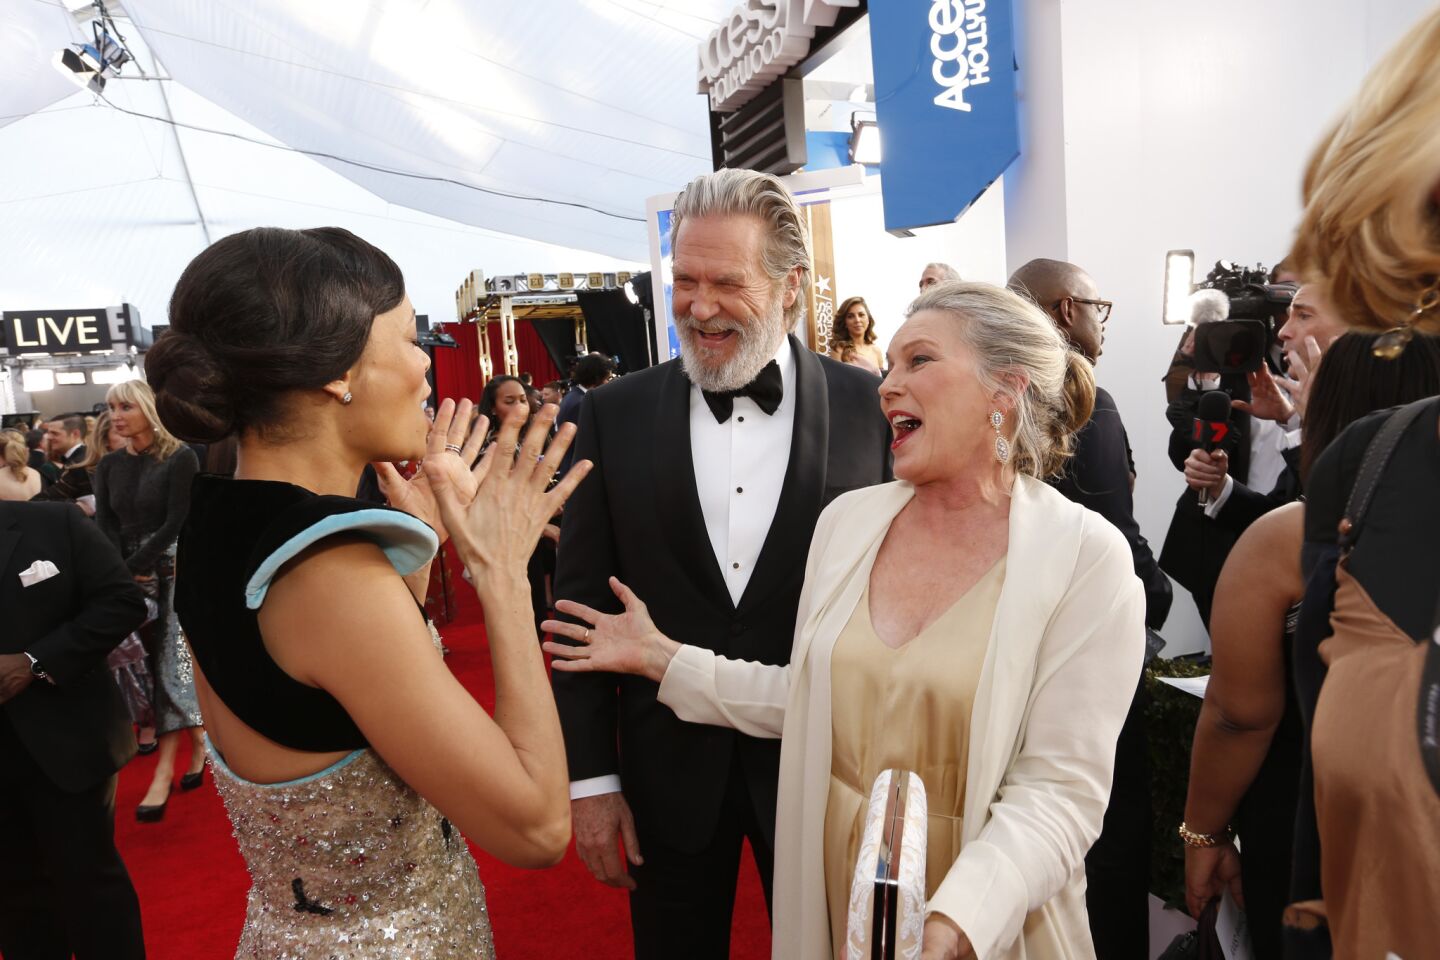 Thandie Newton, a nominee for "Westworld," speaks with Jeff Bridges, a nominee for "Hell or High Wanter," and his wife, Susan Geston.